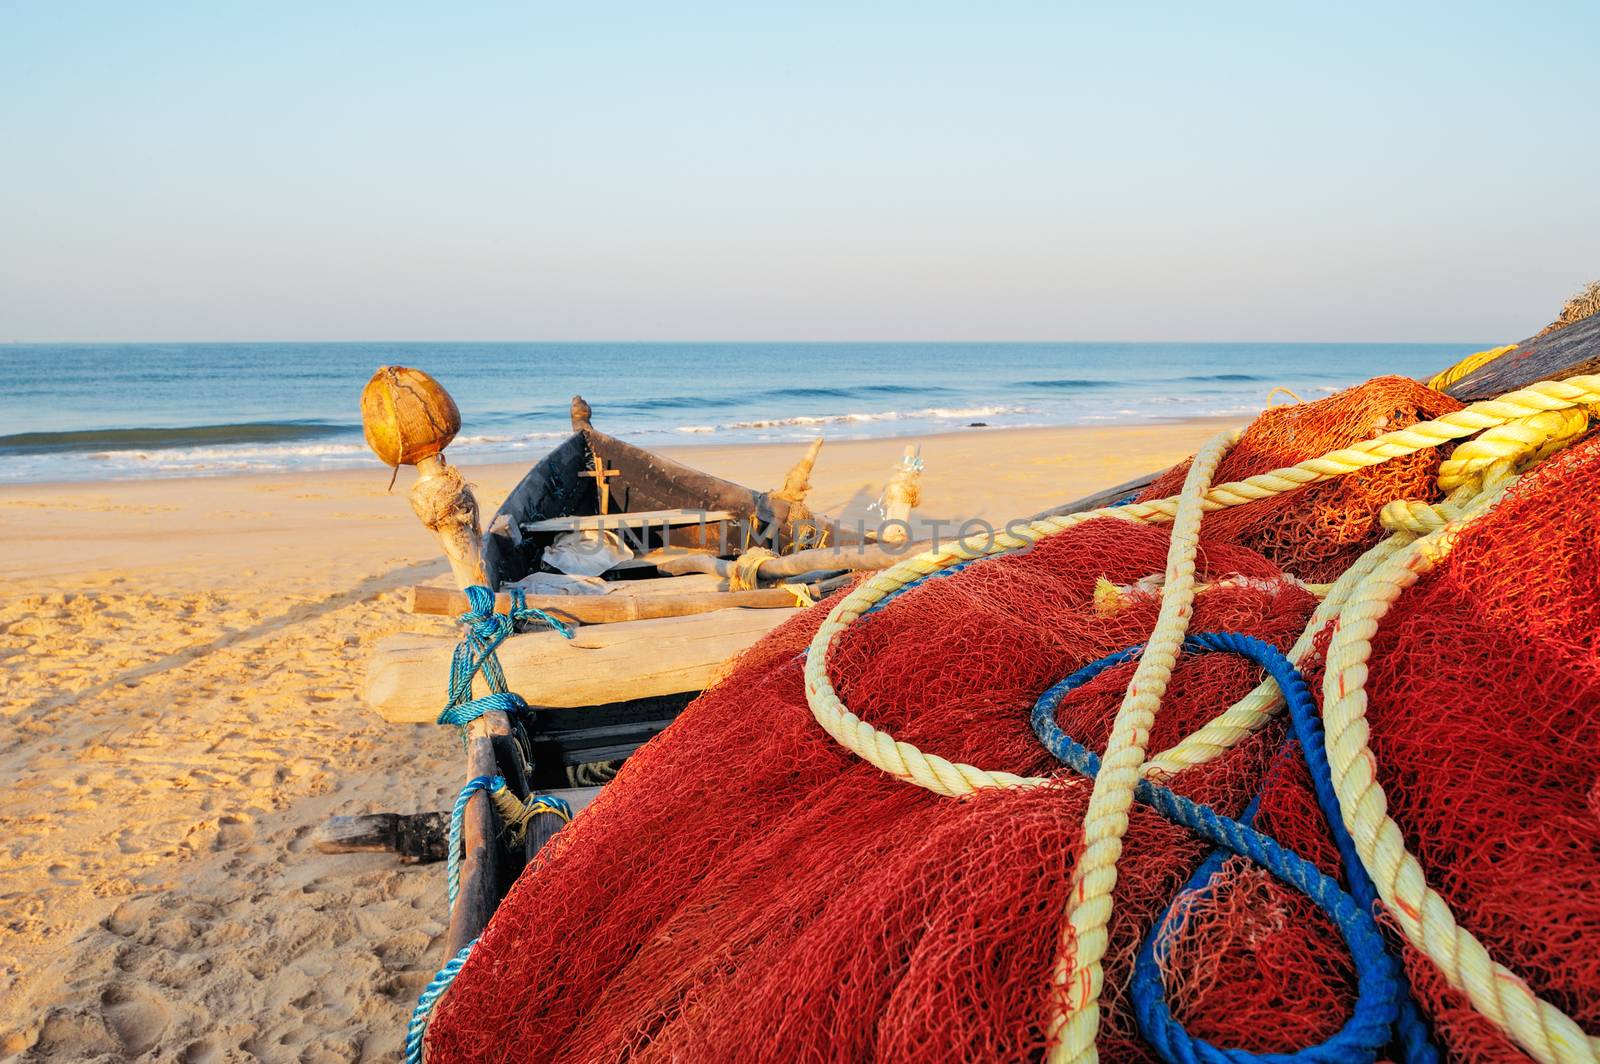 Old fishing boat with red fishing nets on the shore of Goa, India